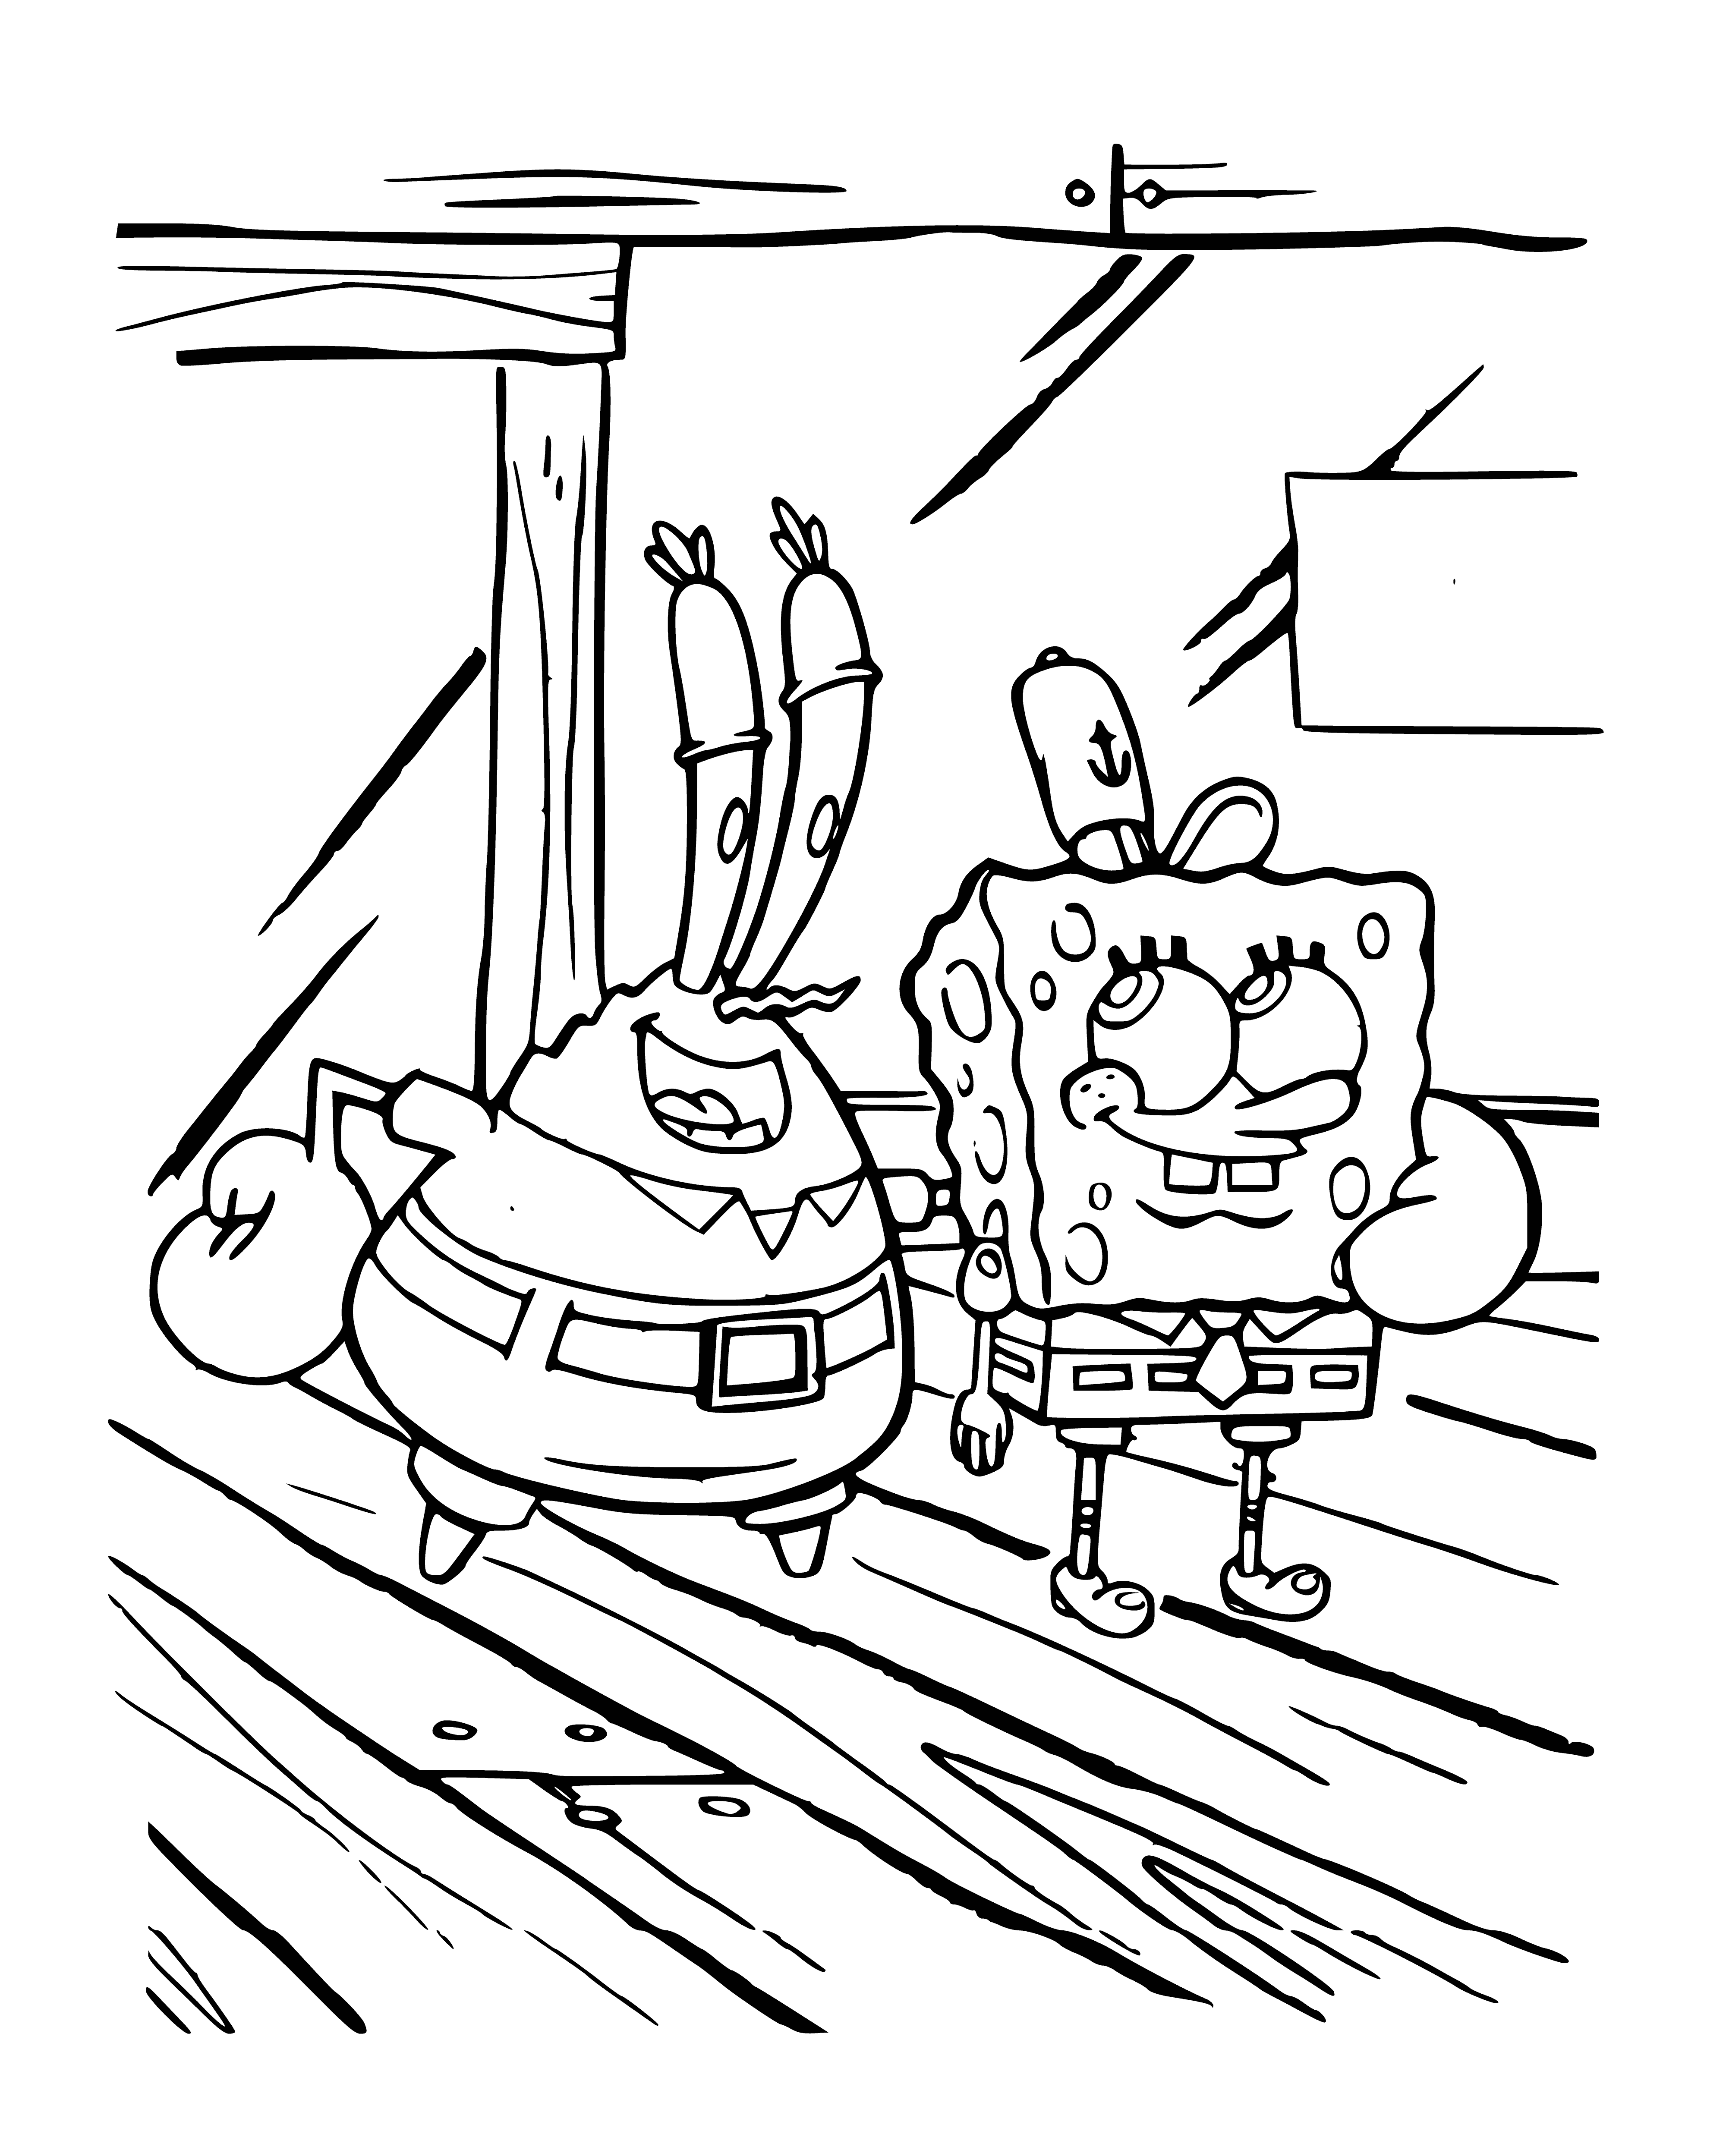 coloring page: SpongeBob smiles, holding a spatula, as he colors in front of a "help wanted" sign.